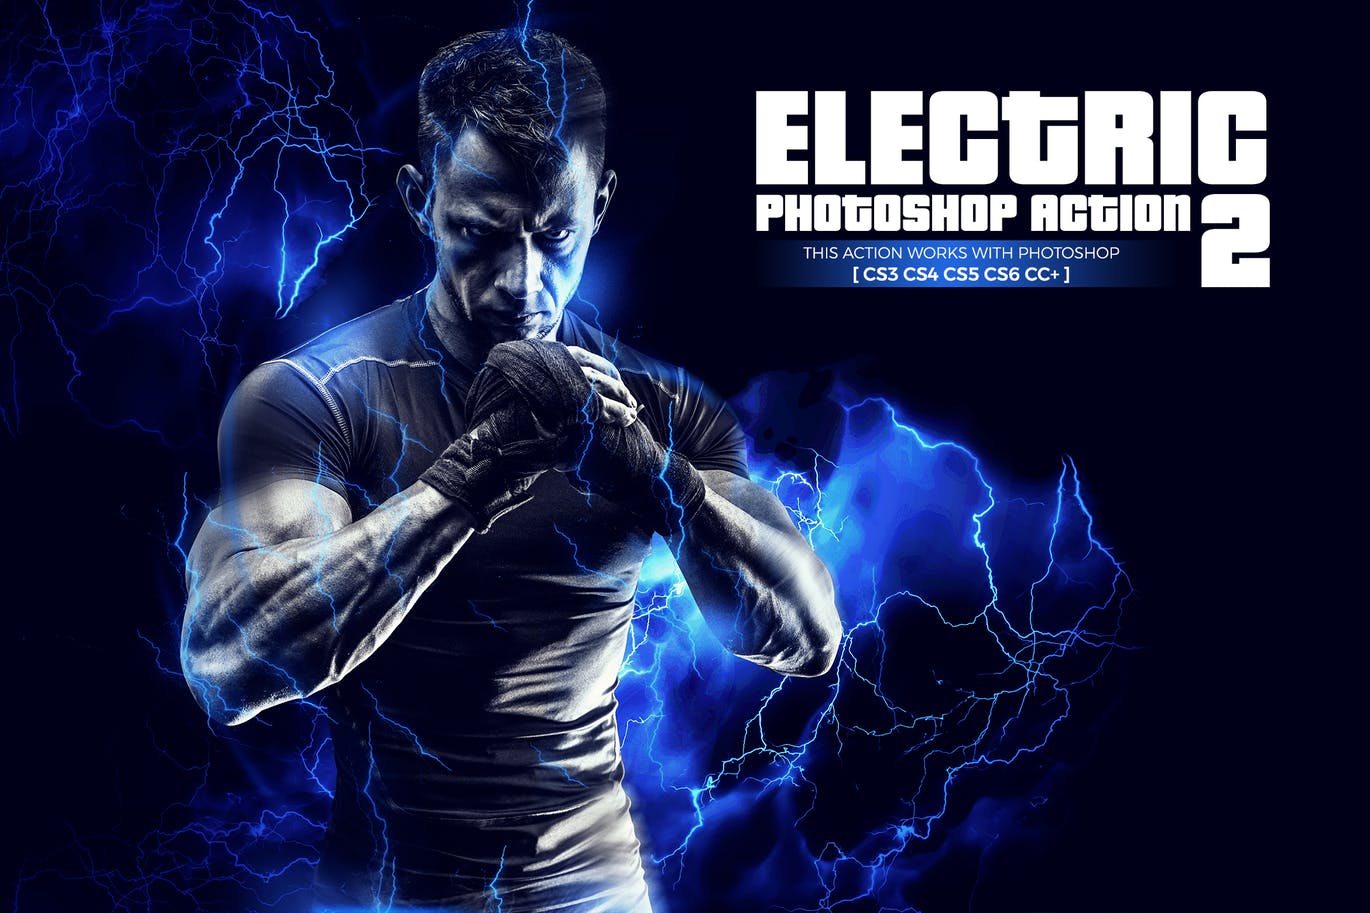 Powerful electric photoshop action